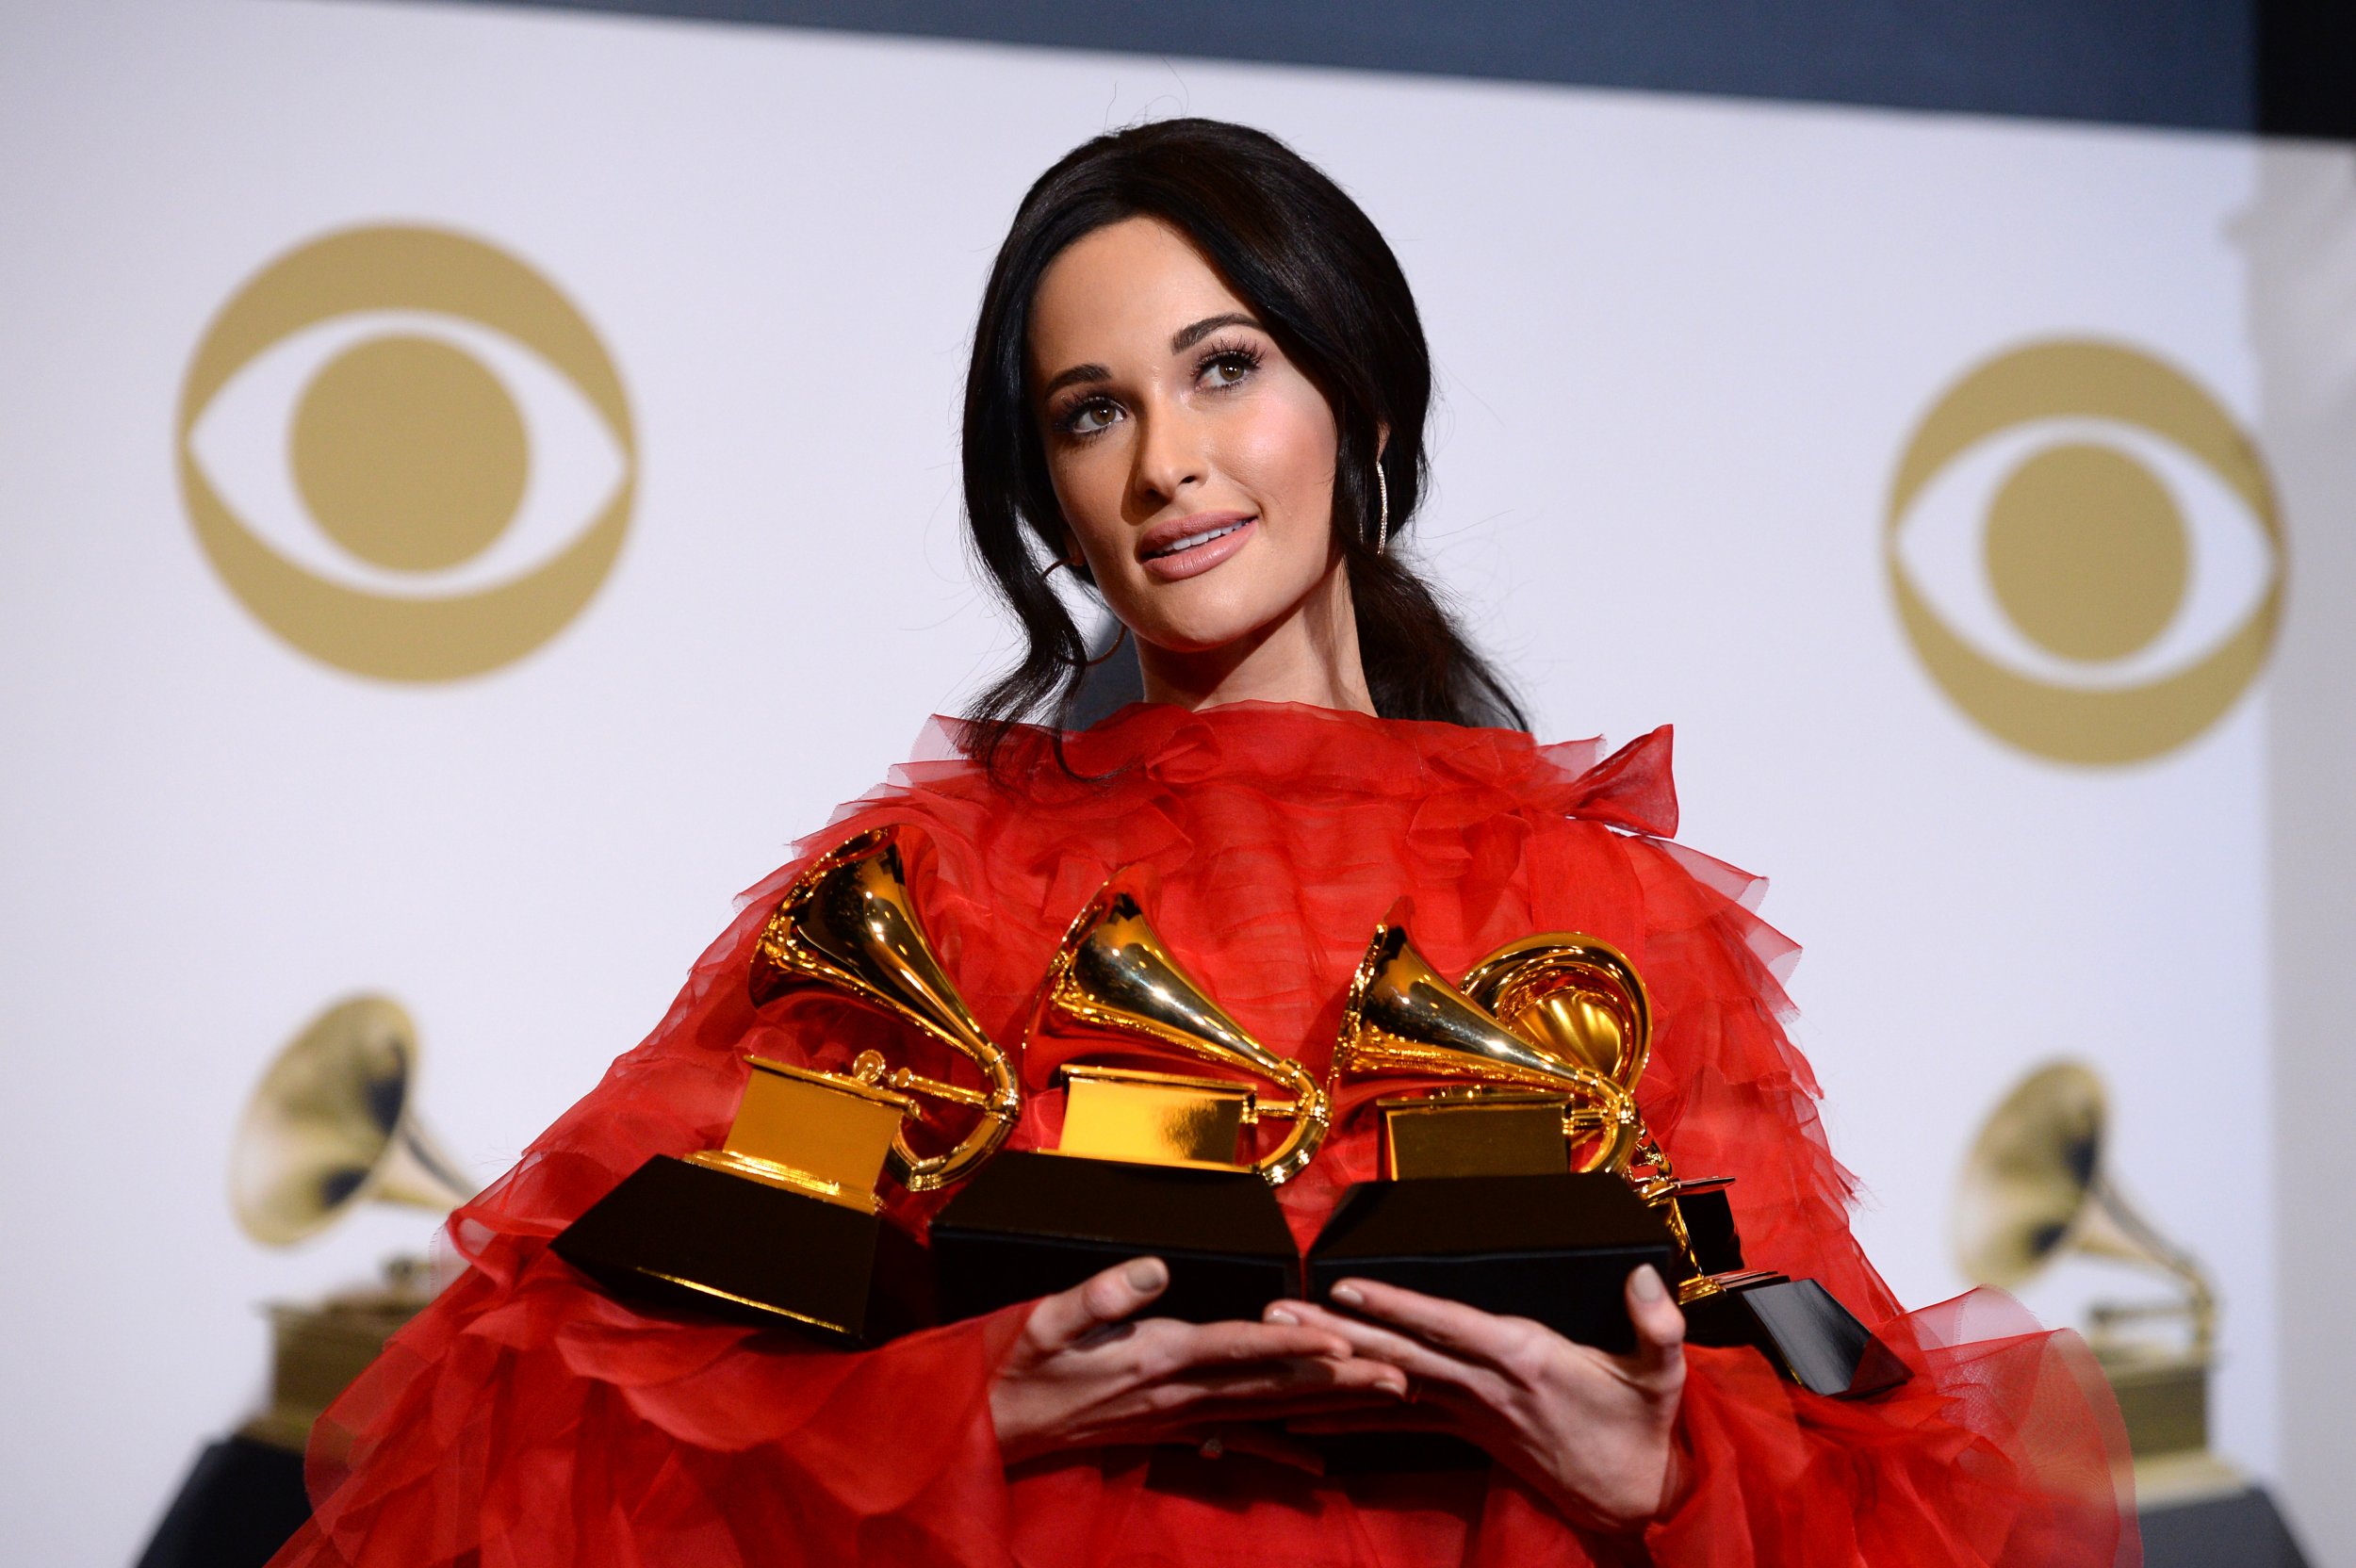 Who is Kacey Musgraves? Everything You Need To Know About The Grammy's